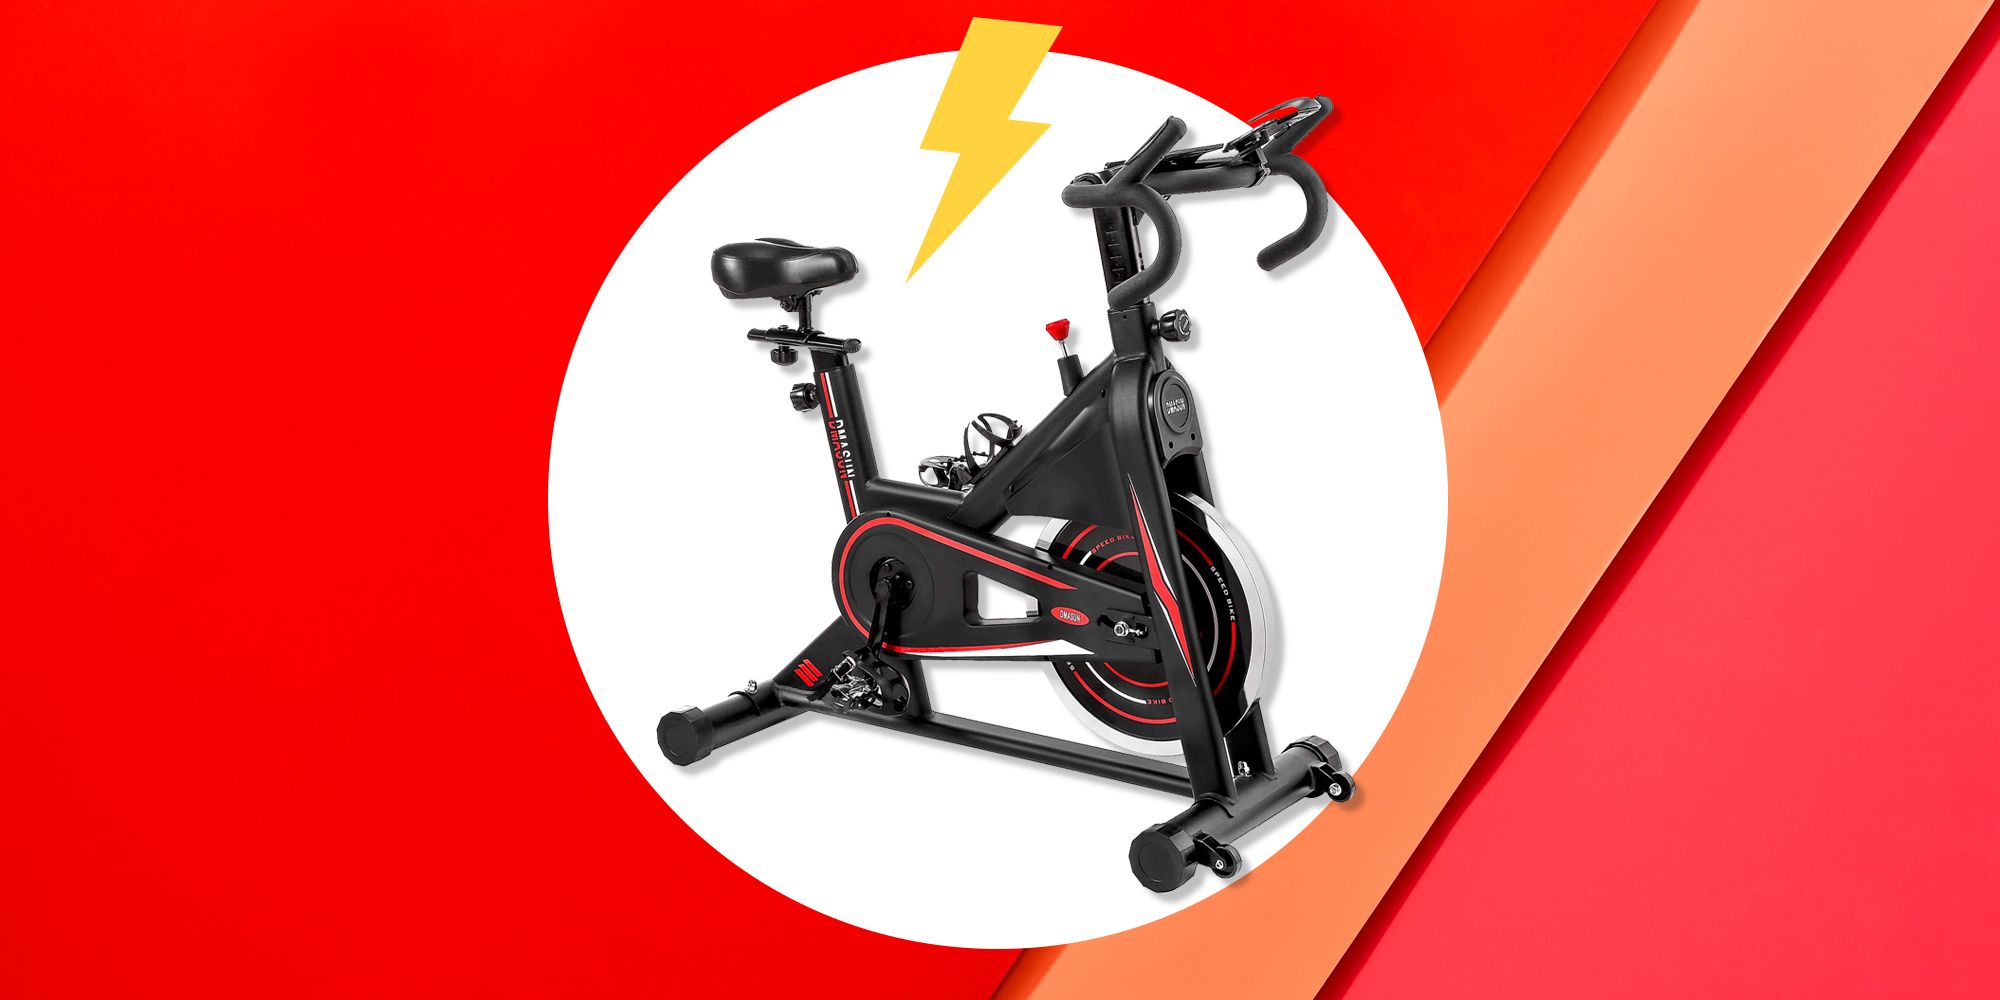 Home Indoor Stationary Exercise Bike Bicycle Cycling Fitness Gym Workout Machine 